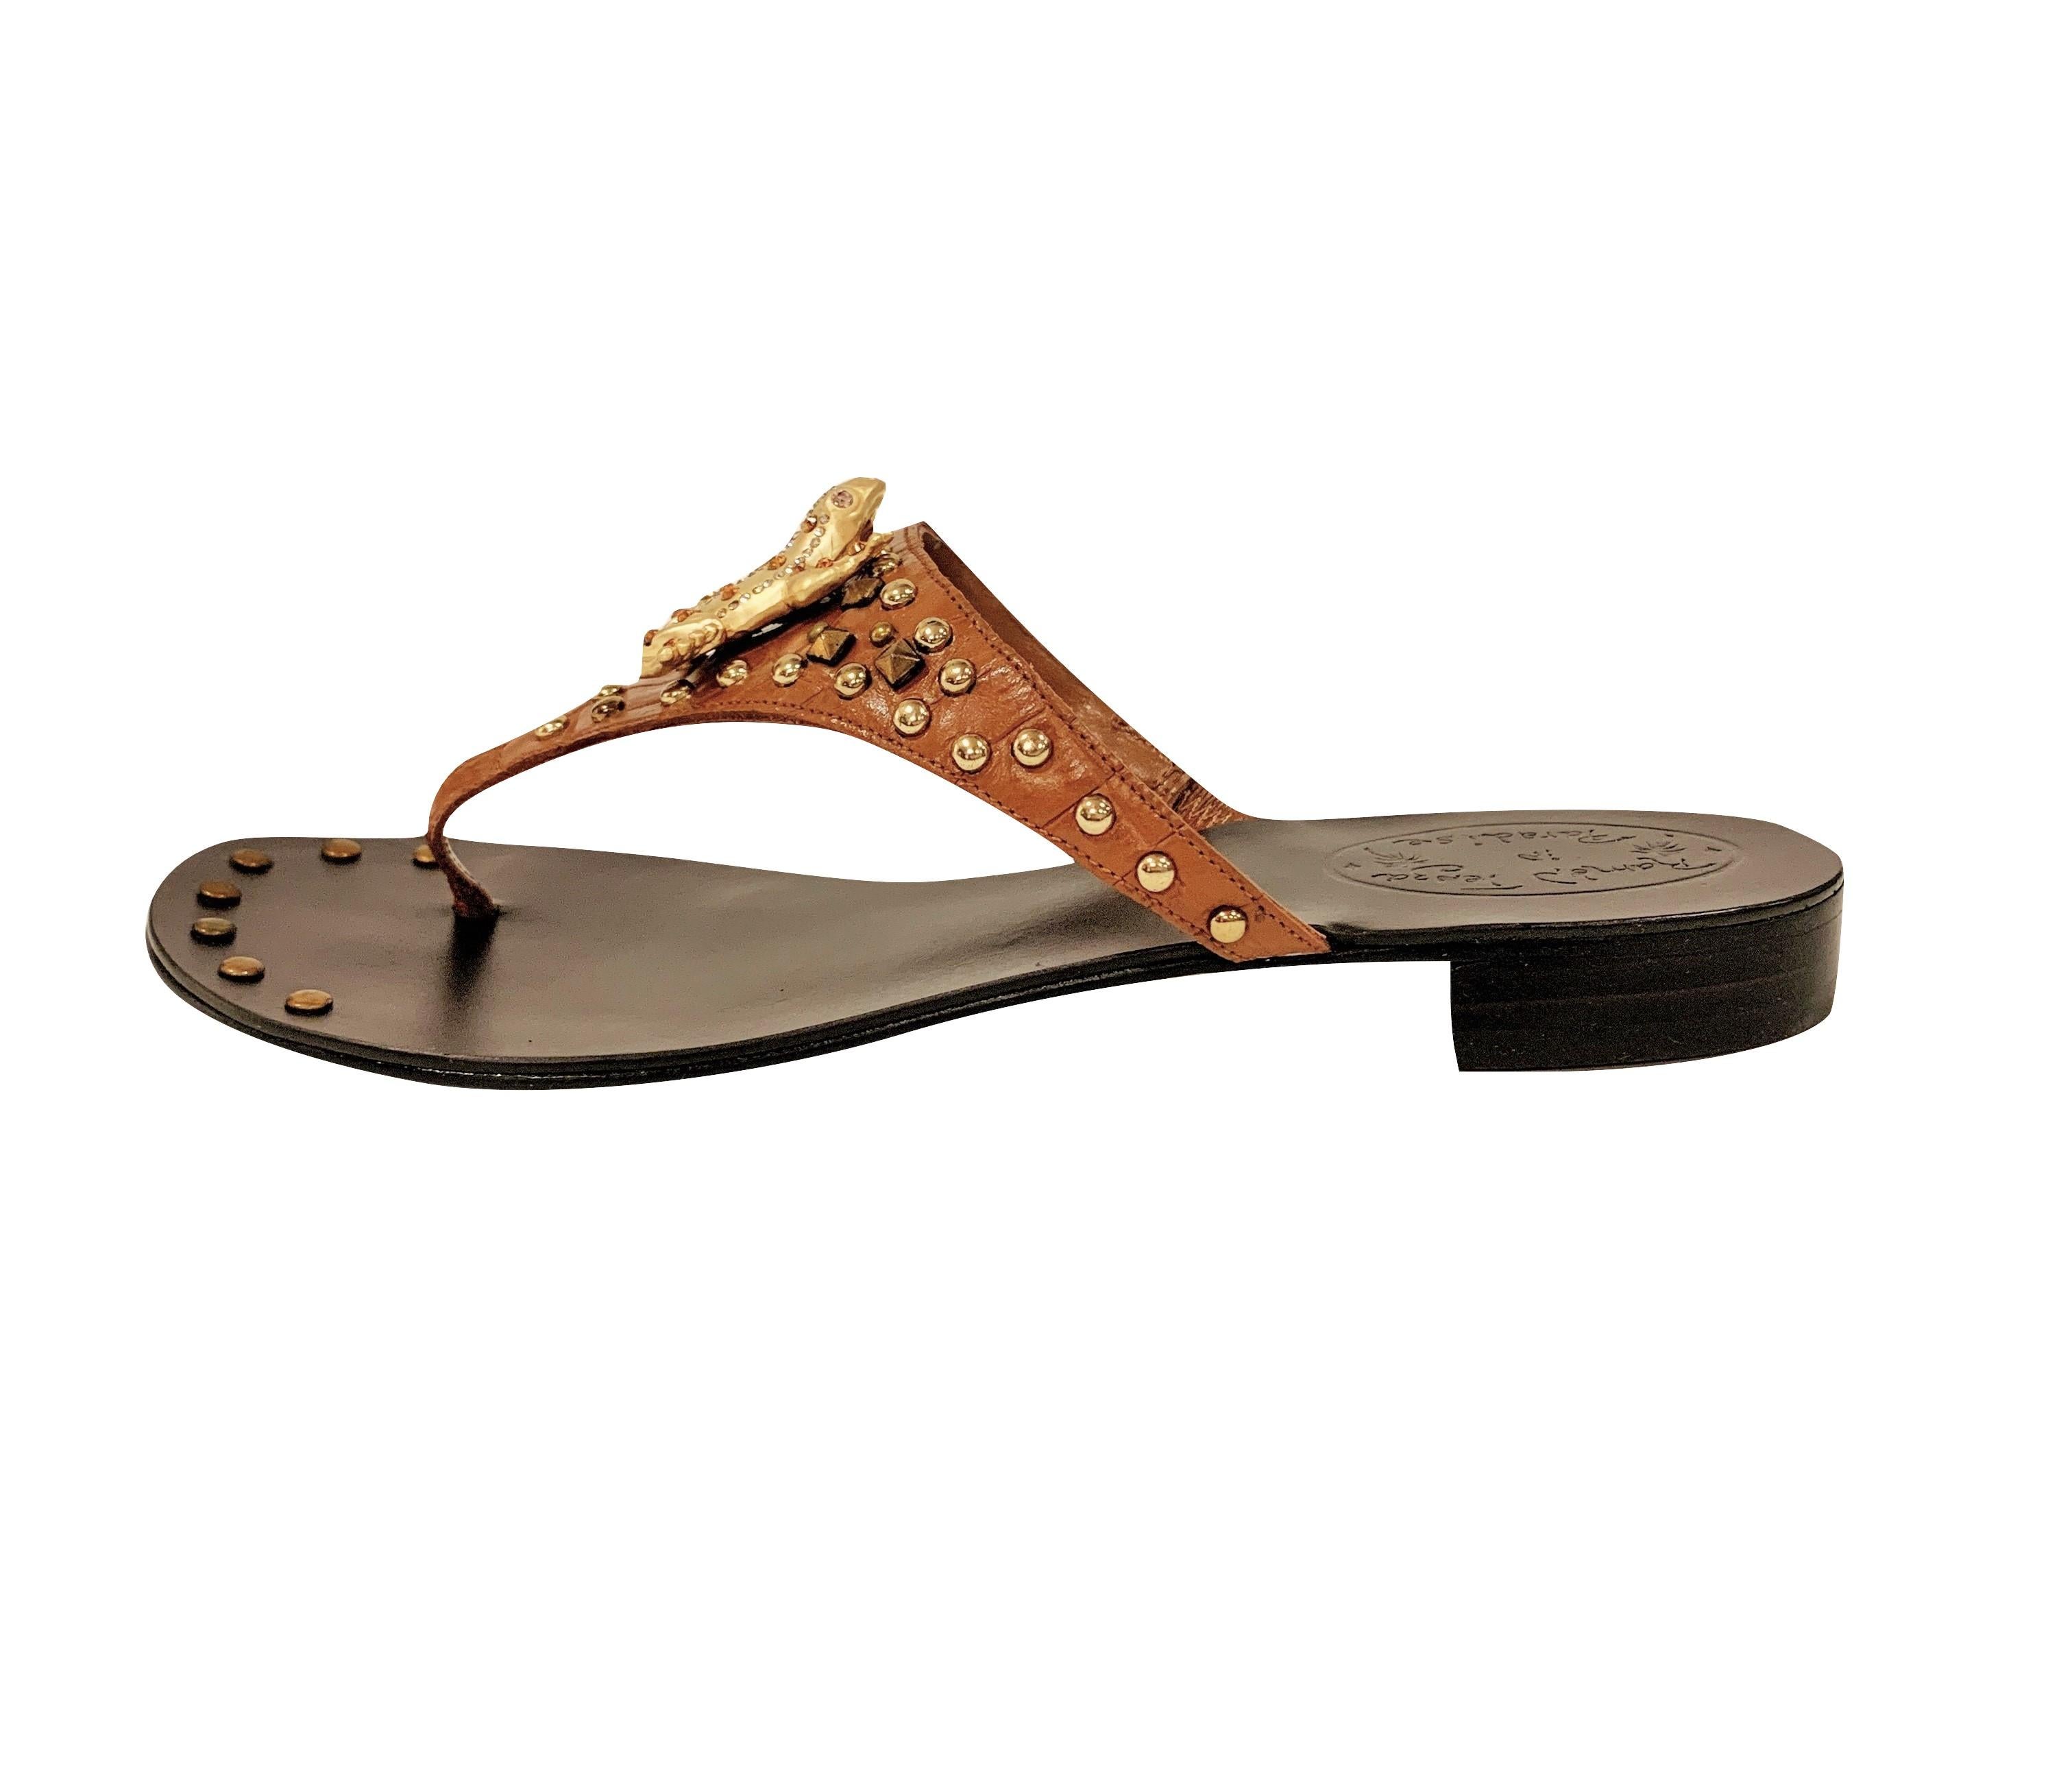 Ramon Tenza Spain
Brand New
Cognac & Gold Thong Sandals
* Gold Frog Adornment
* Cognac Leather
* Gold Beading
* Size: 8.5
* 1.25